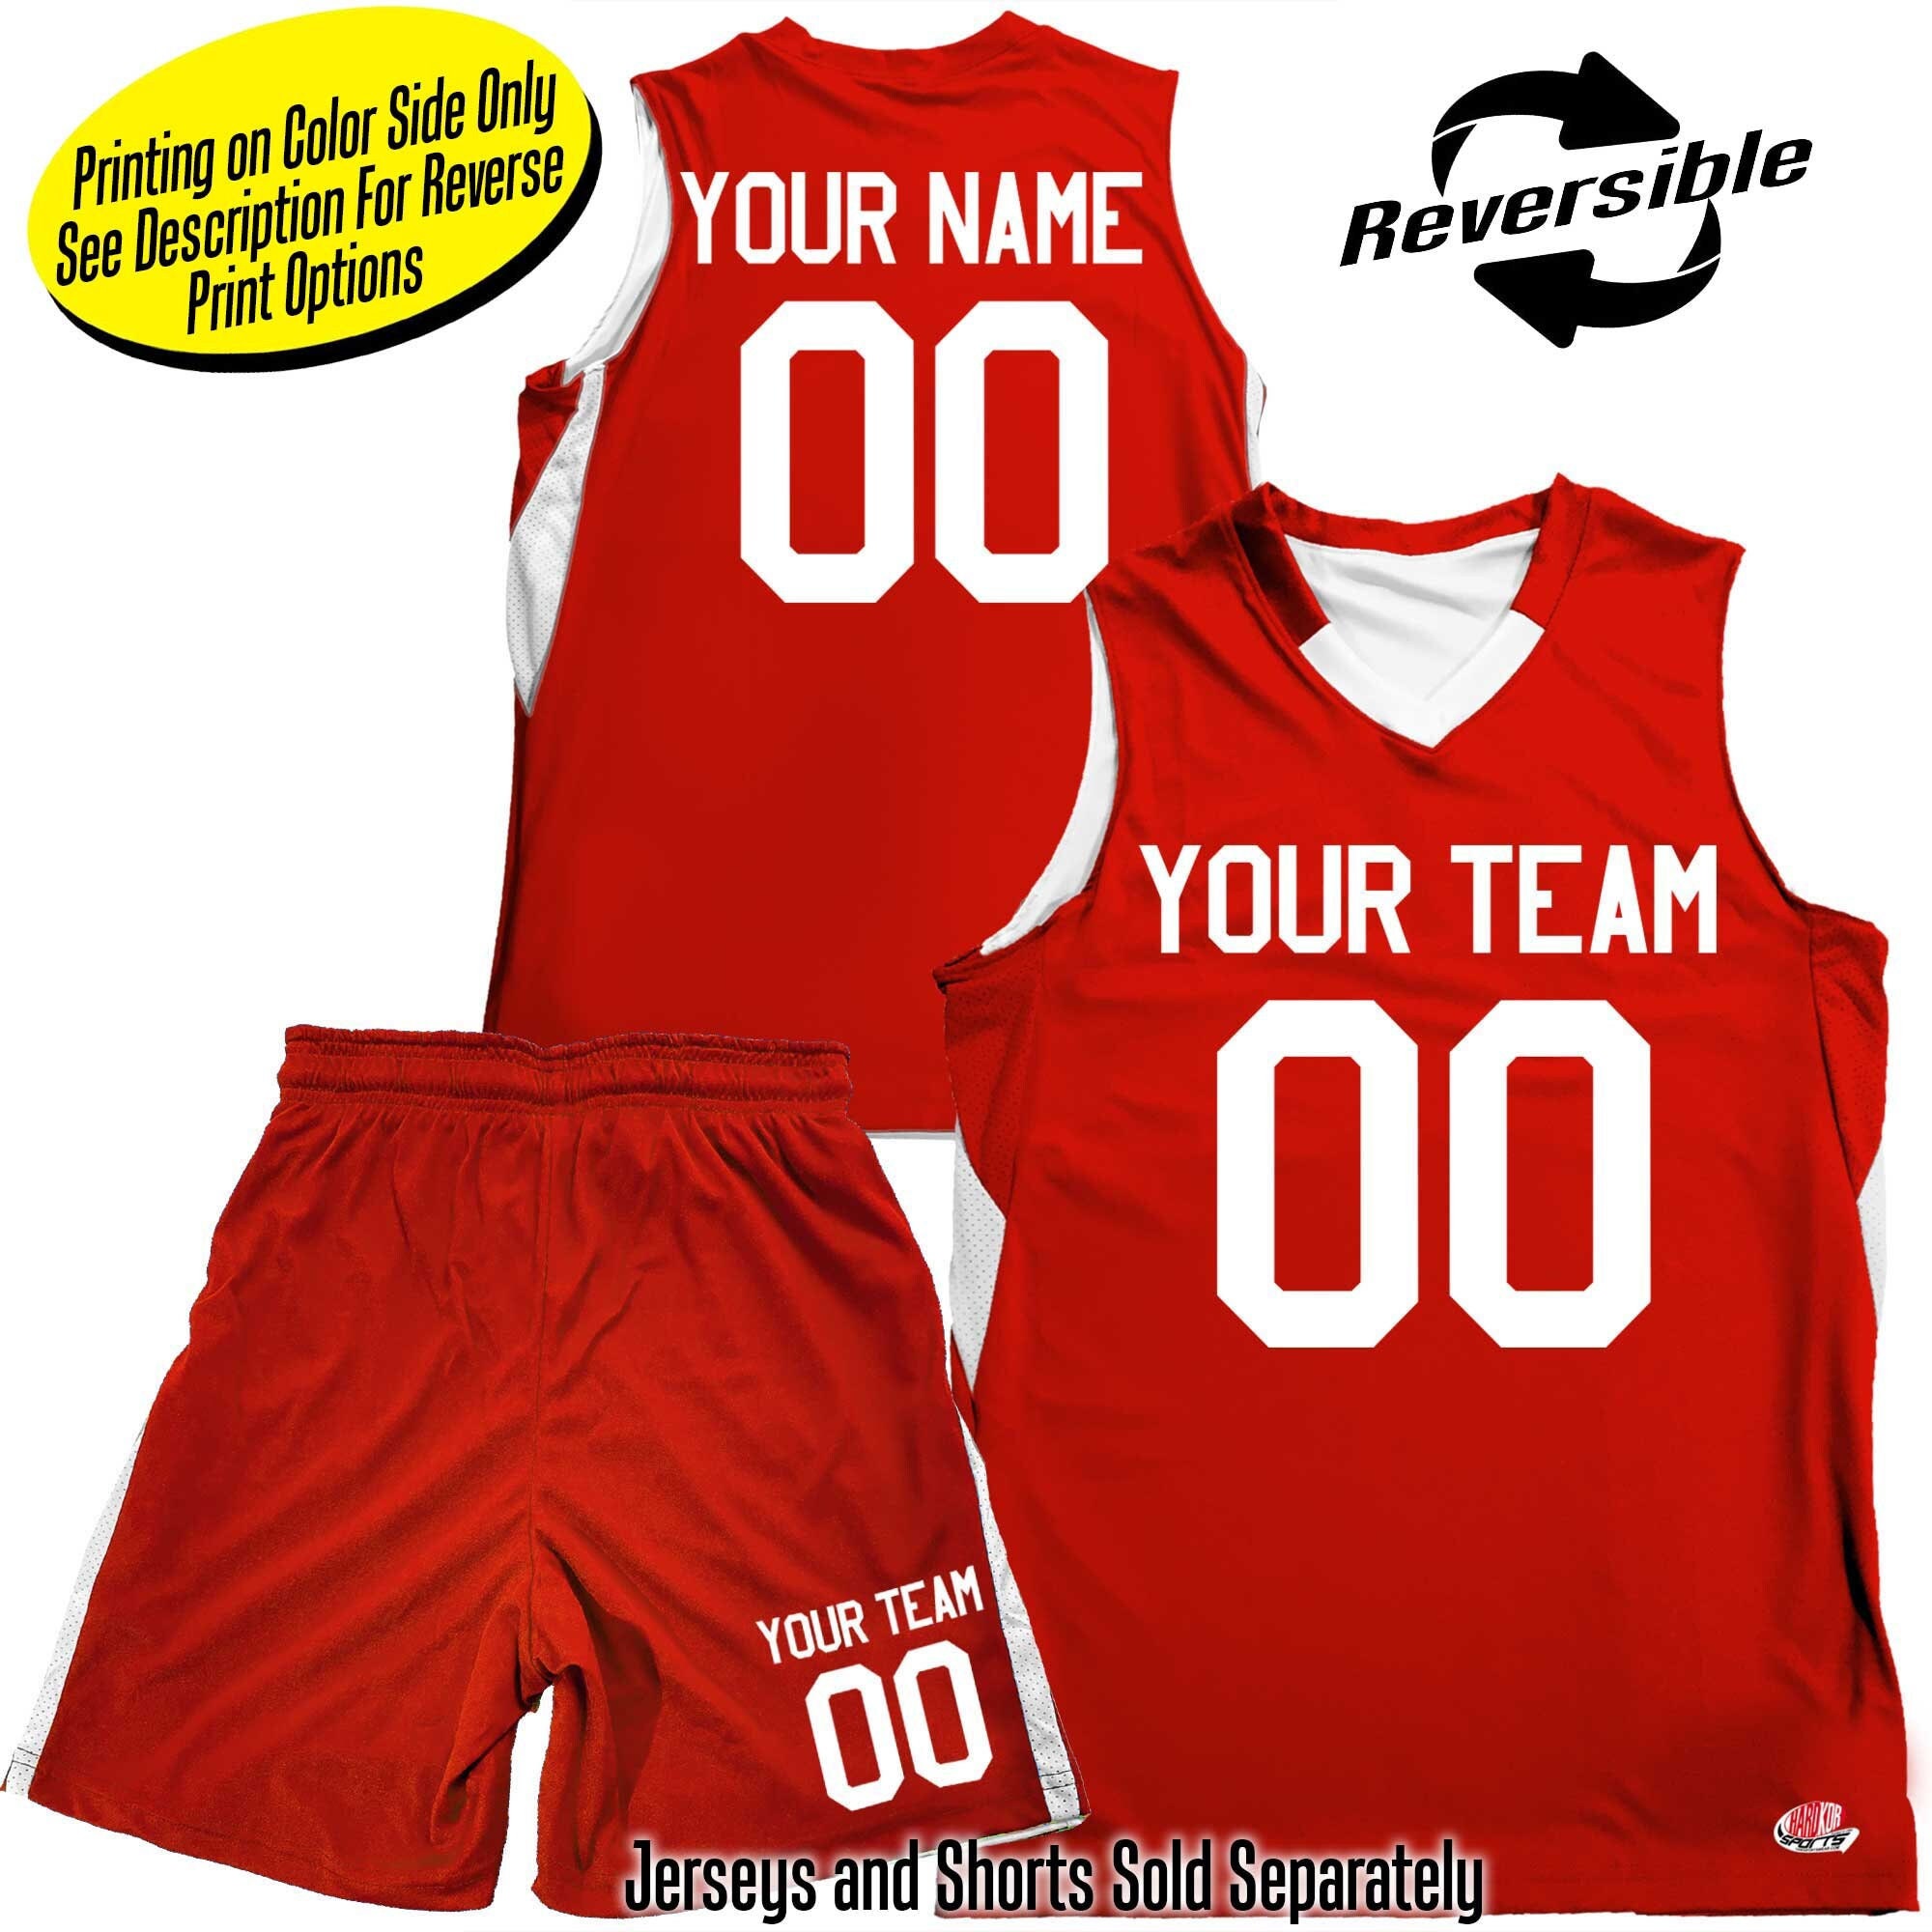  Custom Men Youth Reversible Basketball Jersey Uniform Printed  Personalized Name Number Sportswear Big Size White&black-19 One Size 